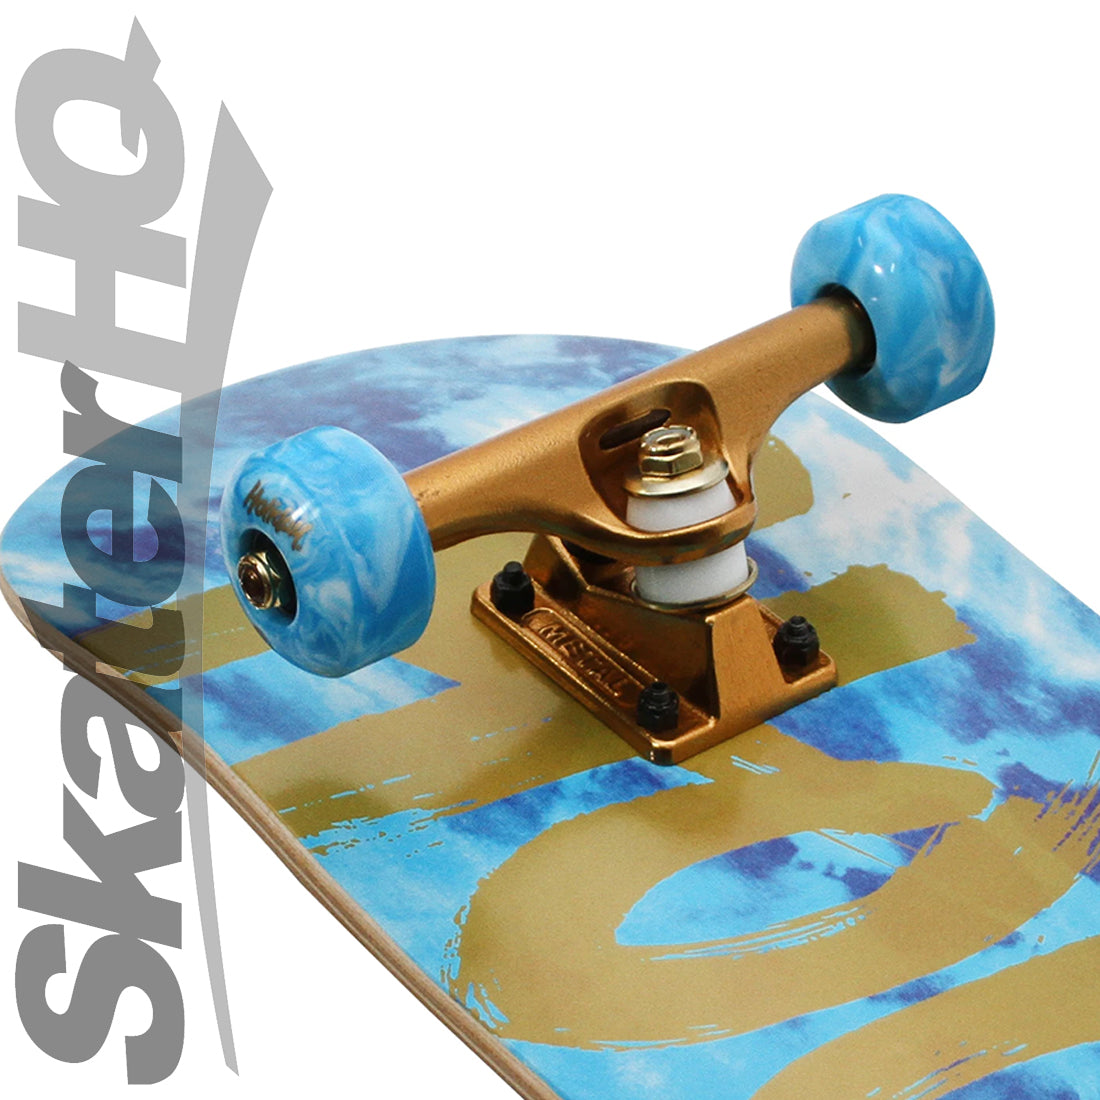 Holiday Tie Dye 7.75 Complete - Blue/Gold Skateboard Completes Modern Street